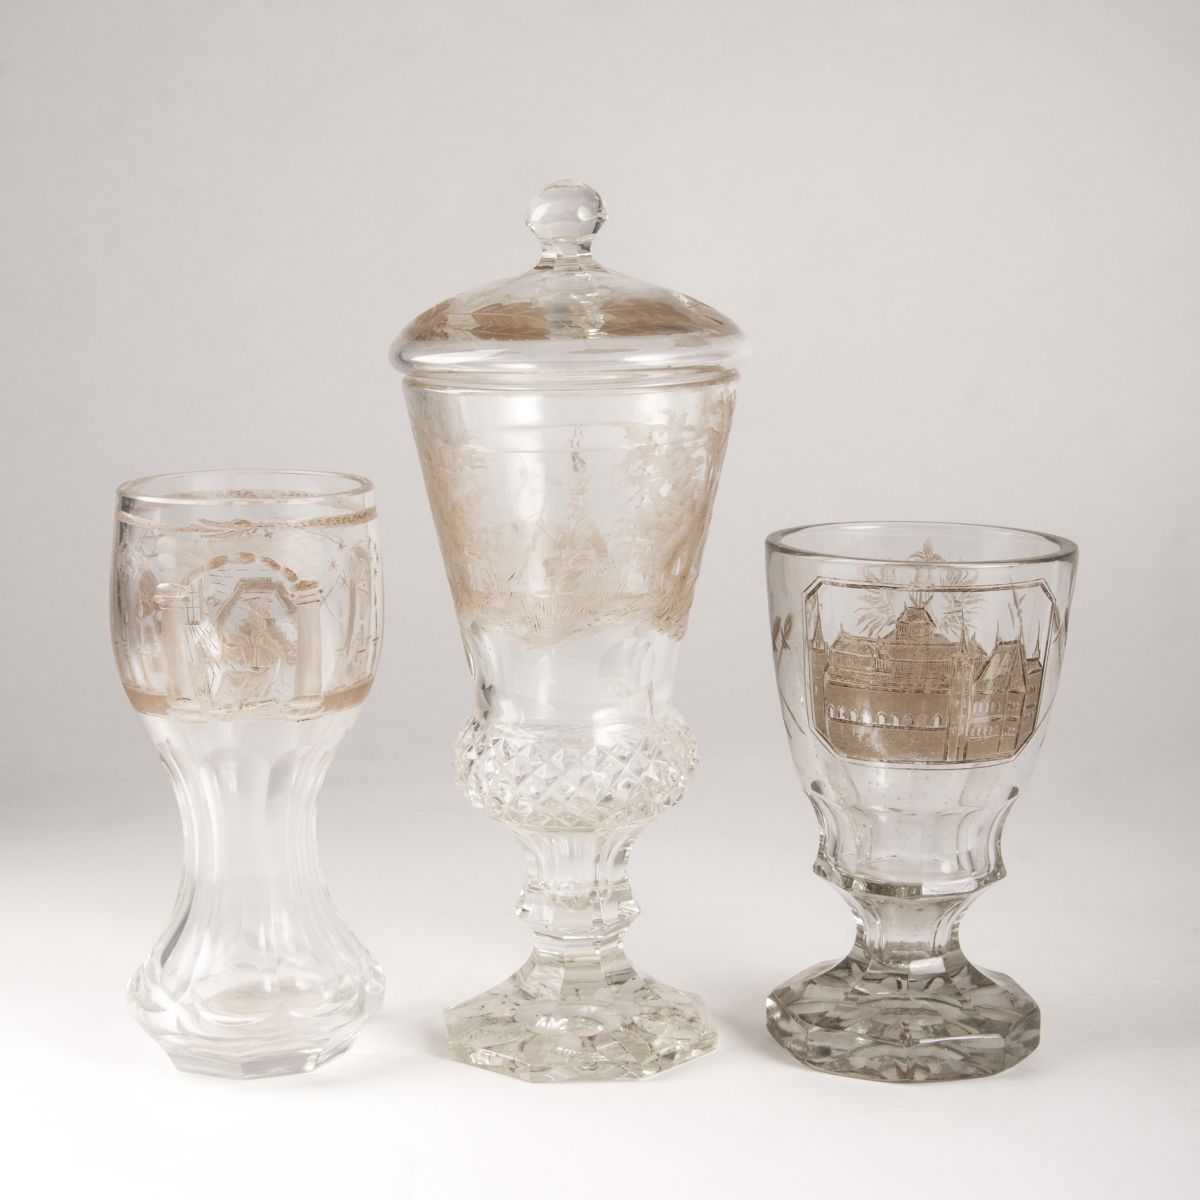 Two Biedermeier glass beakers and a lidded cup